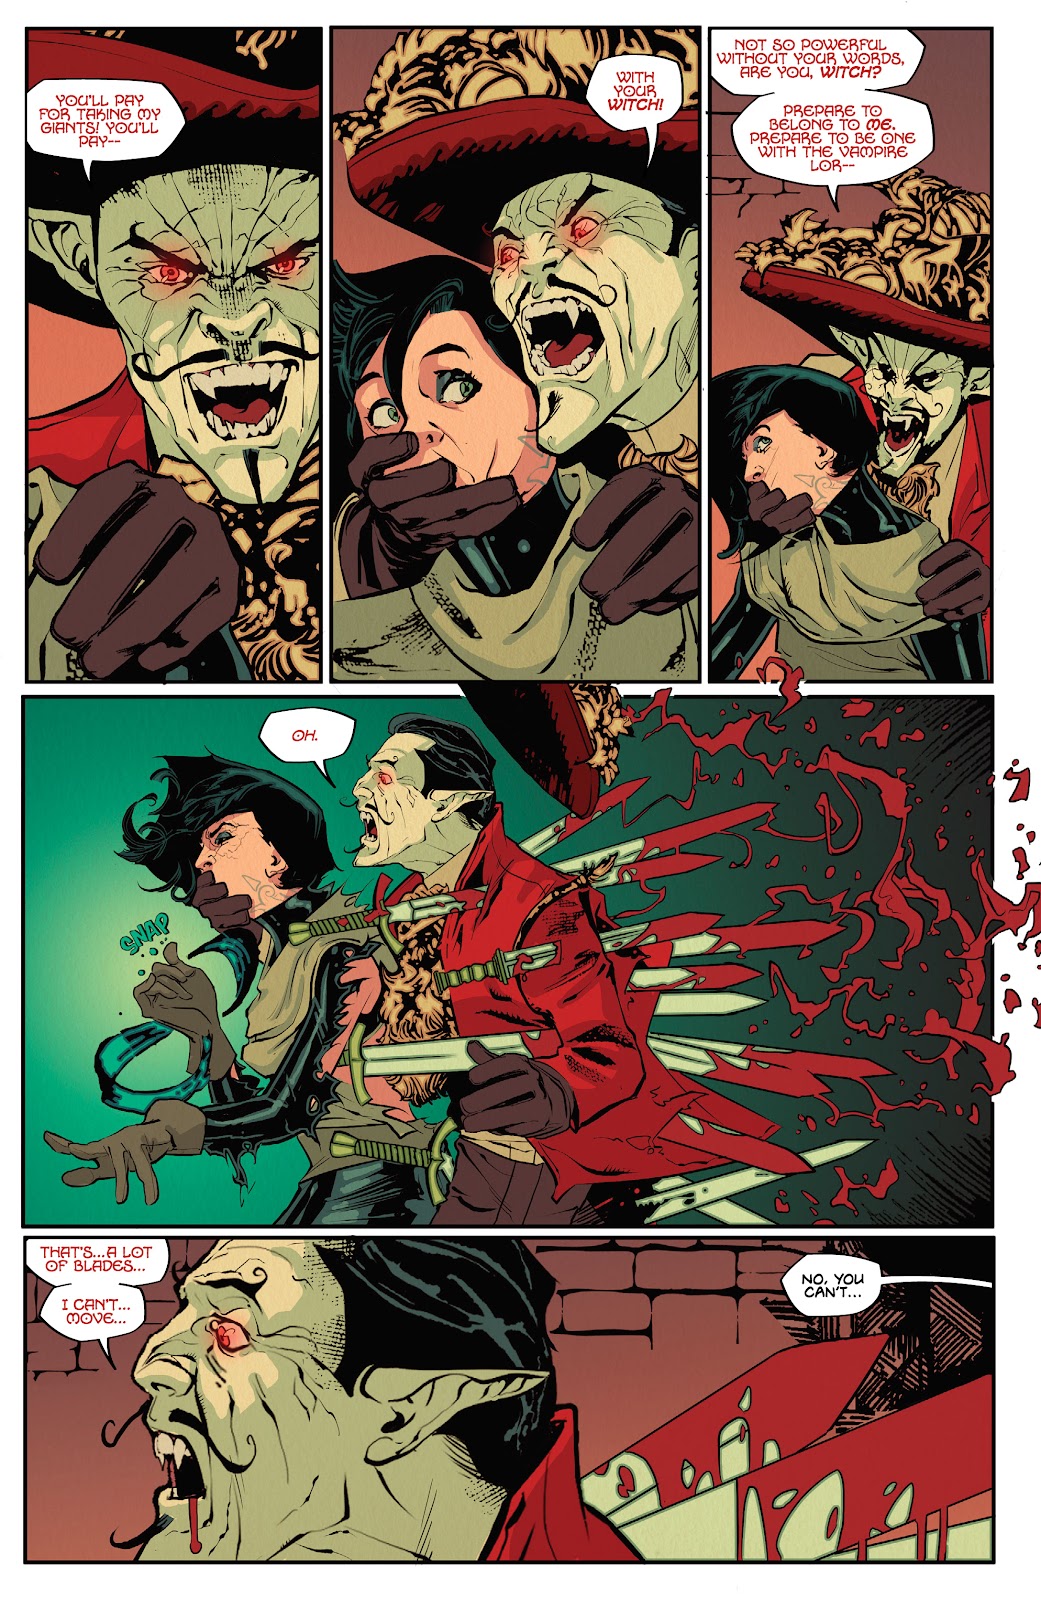 Barbaric: Axe to Grind issue 1 - Page 11